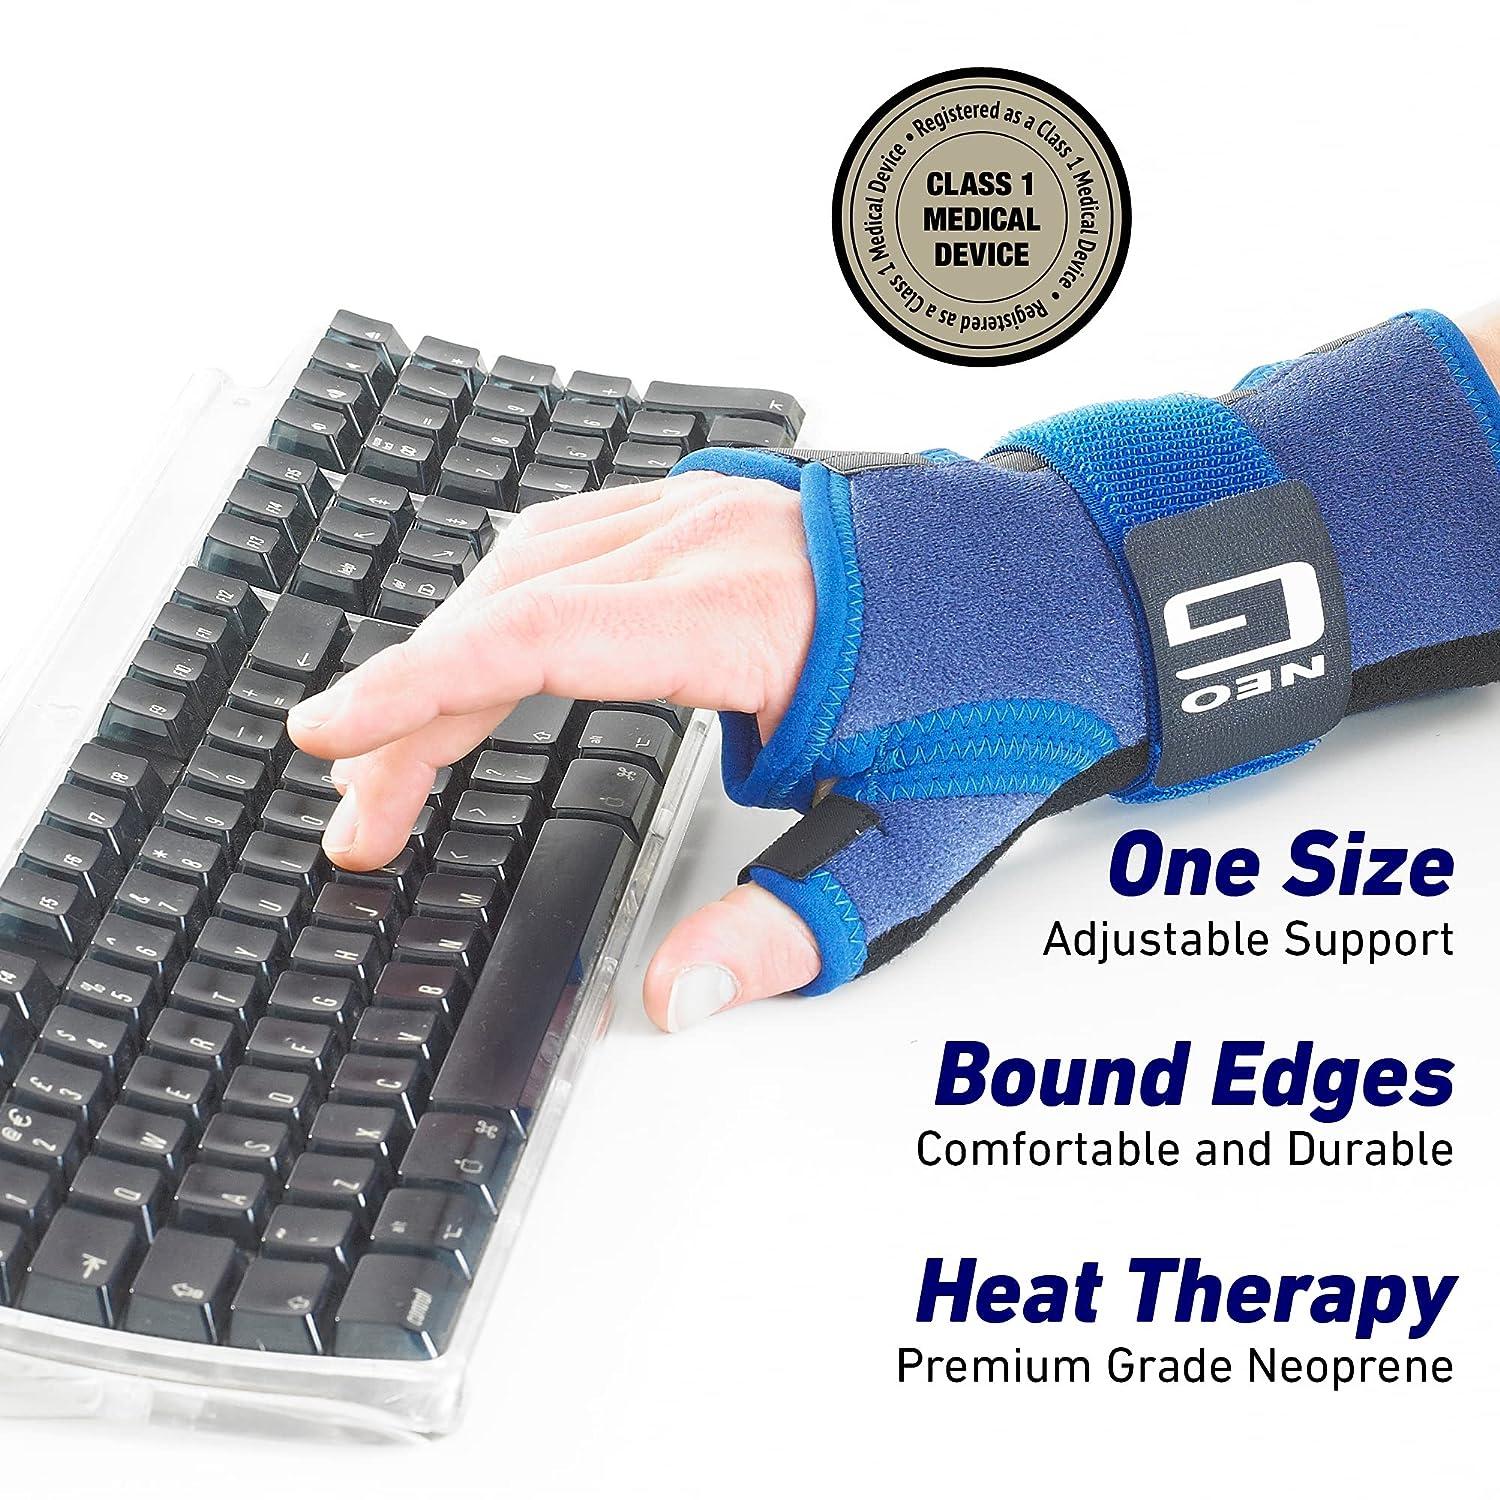  Neo G Wrist and Thumb Brace, Stabilized - Spica